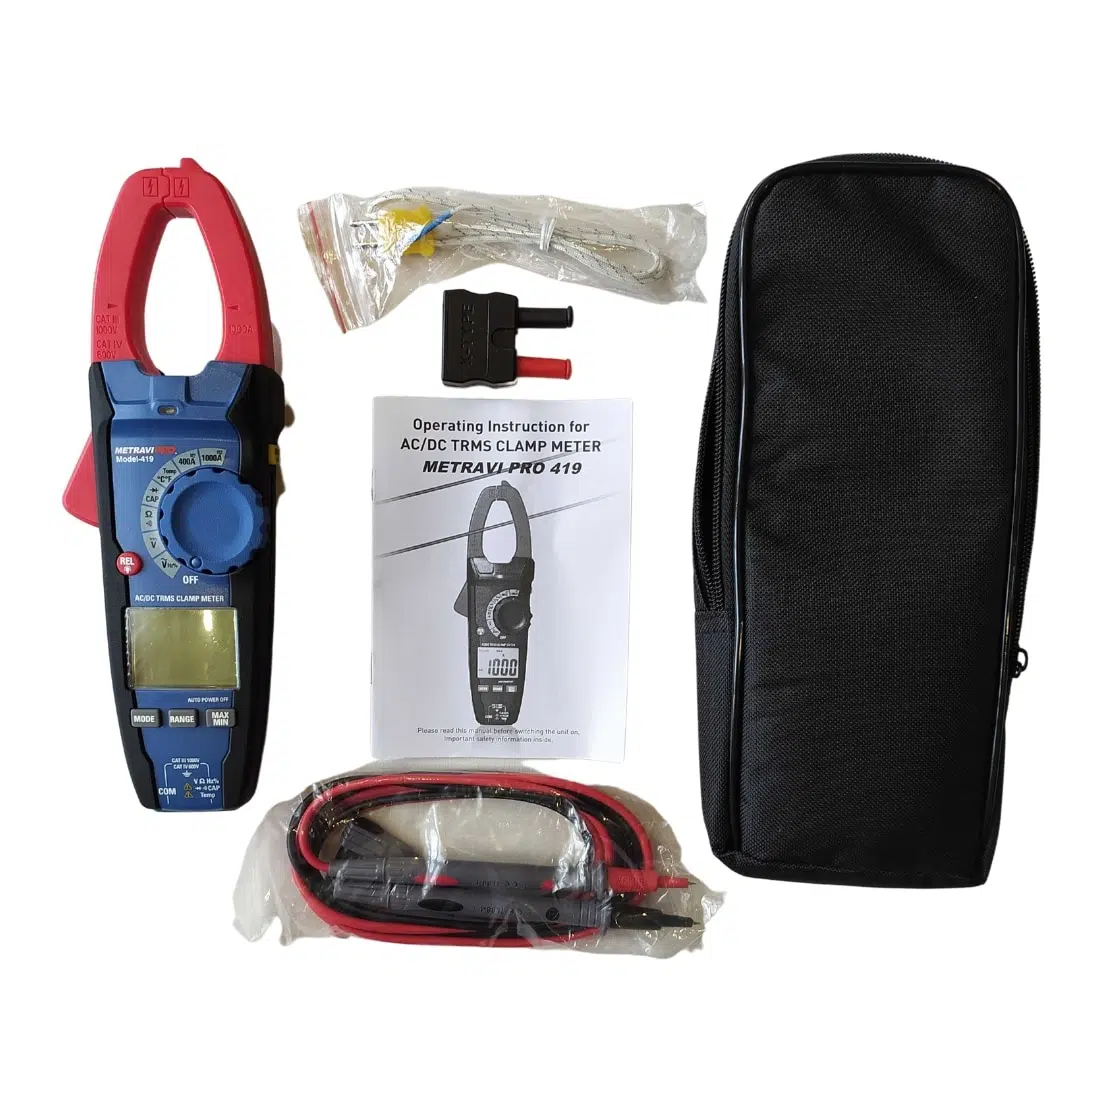 Metravi PRO 419 Digital T-RMS AC/DC Fully-protected Clamp Meter for 1000A AC T-RMS/DC with NCV